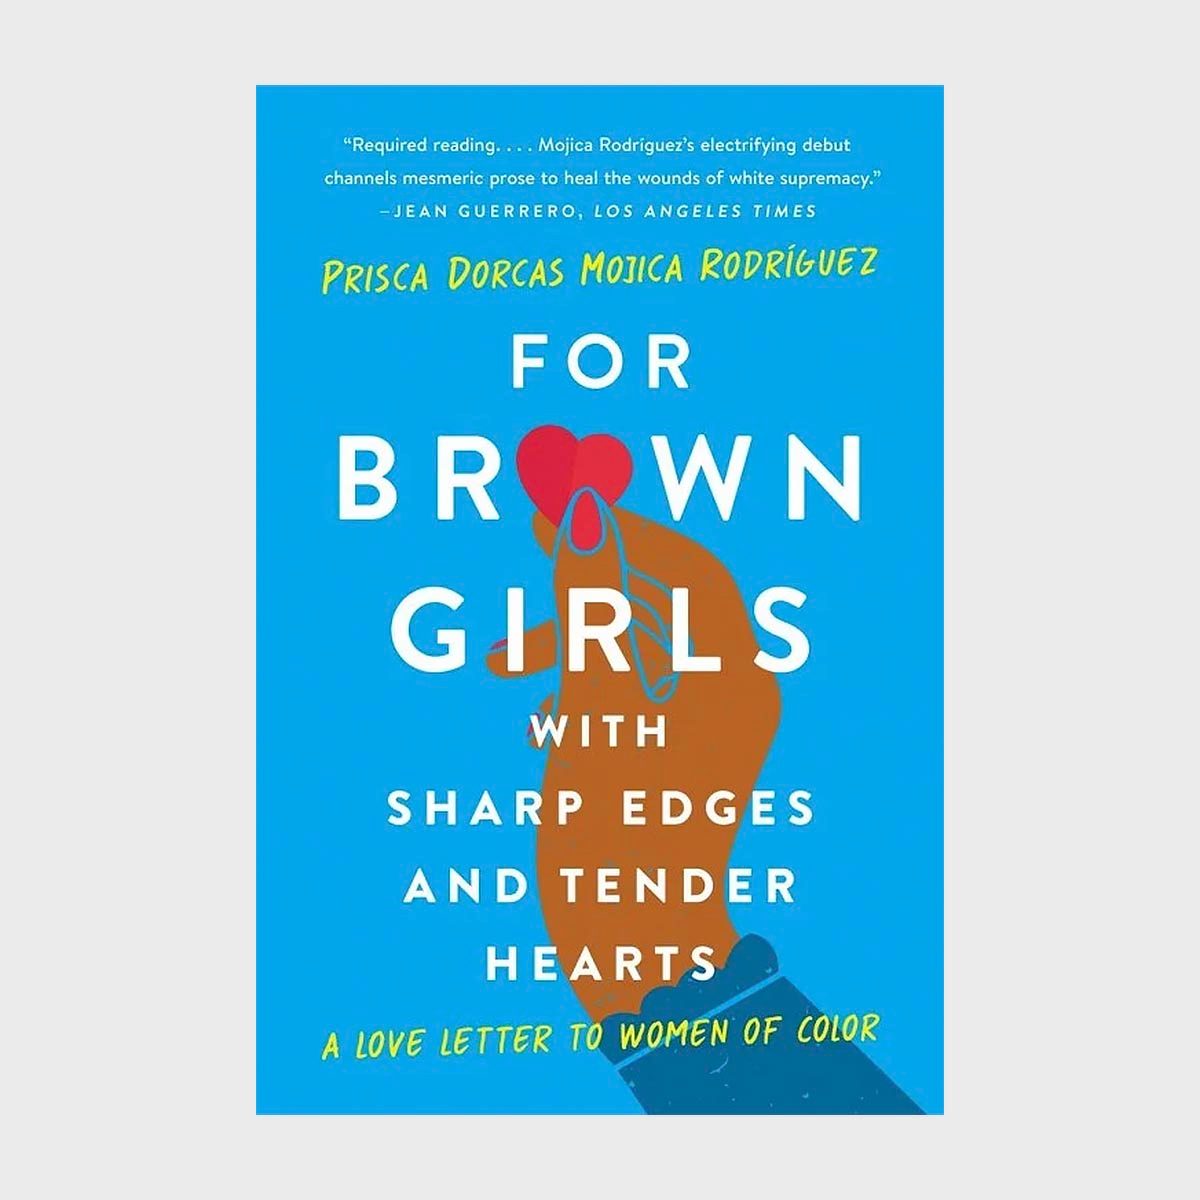 For Brown Girls with Sharp Edges and Tender Hearts by Prisca Dorcas Mojica Rodríguez